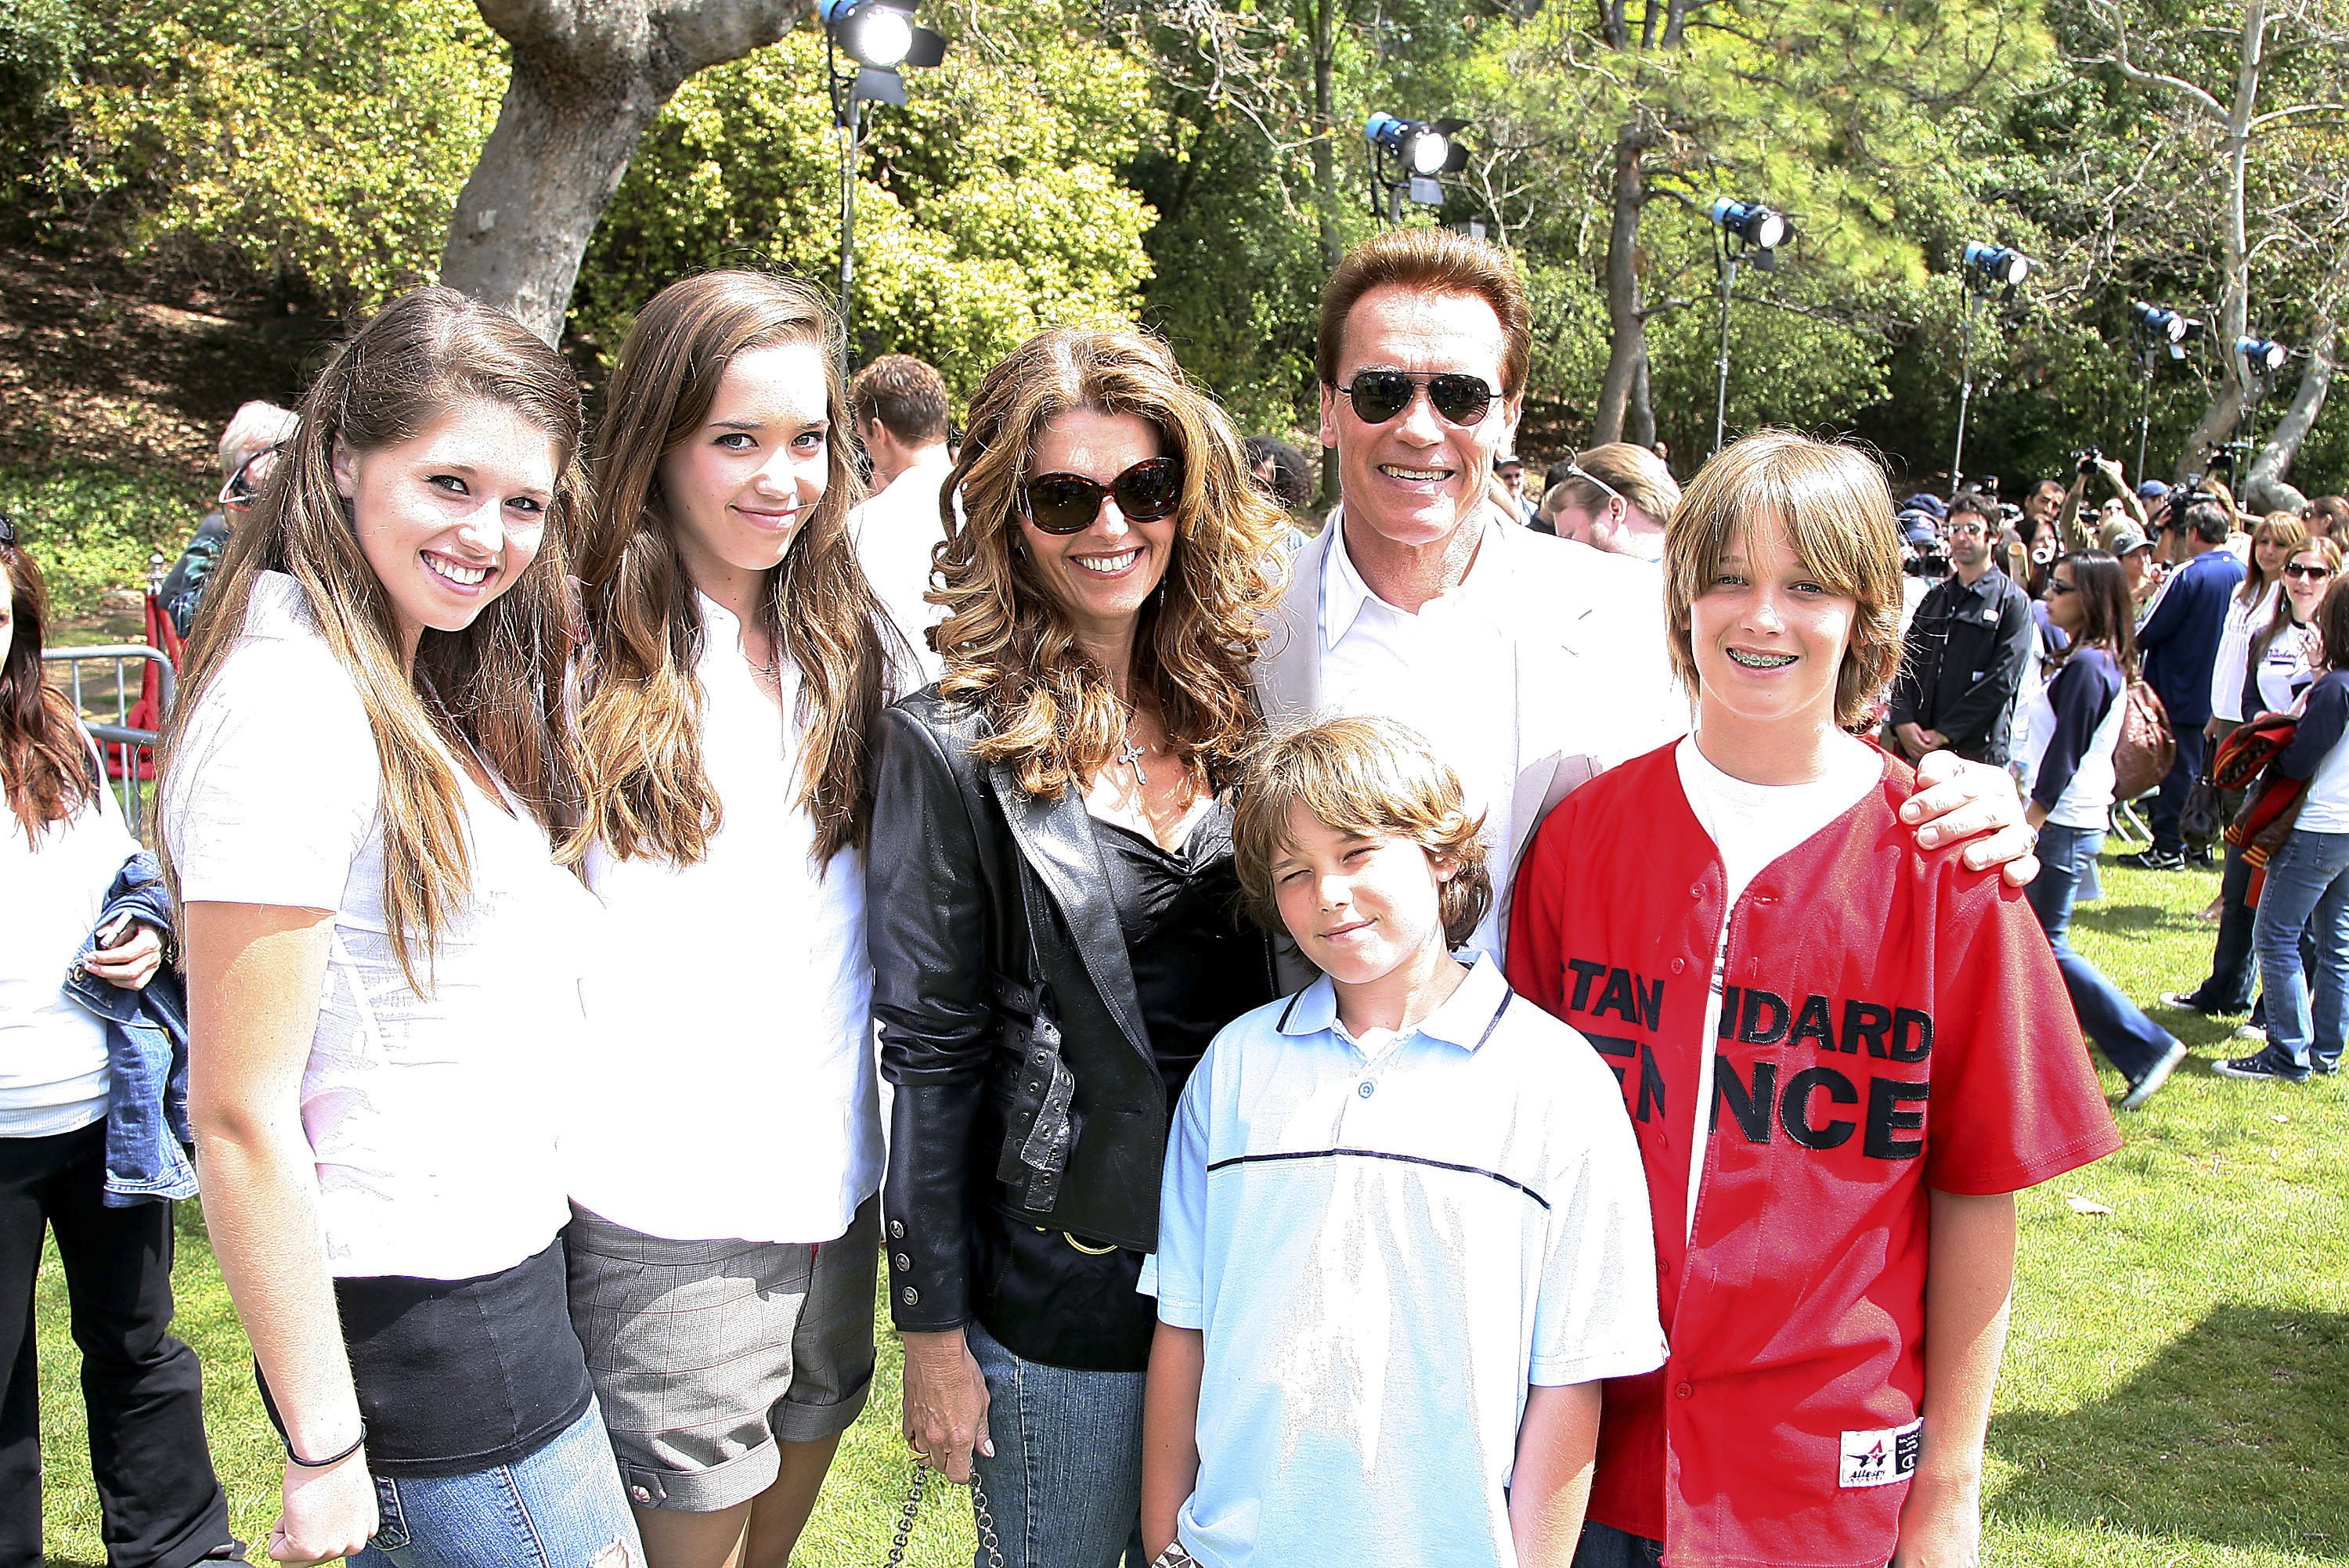 Arnold Schwarzenegger and his wife Maria Shriver pose with their children Katherine, Christina, Patrick and Christopher at a pre-premiere softball game with "The Benchwarmers" at UCLA's Sunset Canyon Recreation Center on April 2, 2006 in Los Angeles, California. | Source: Getty Images